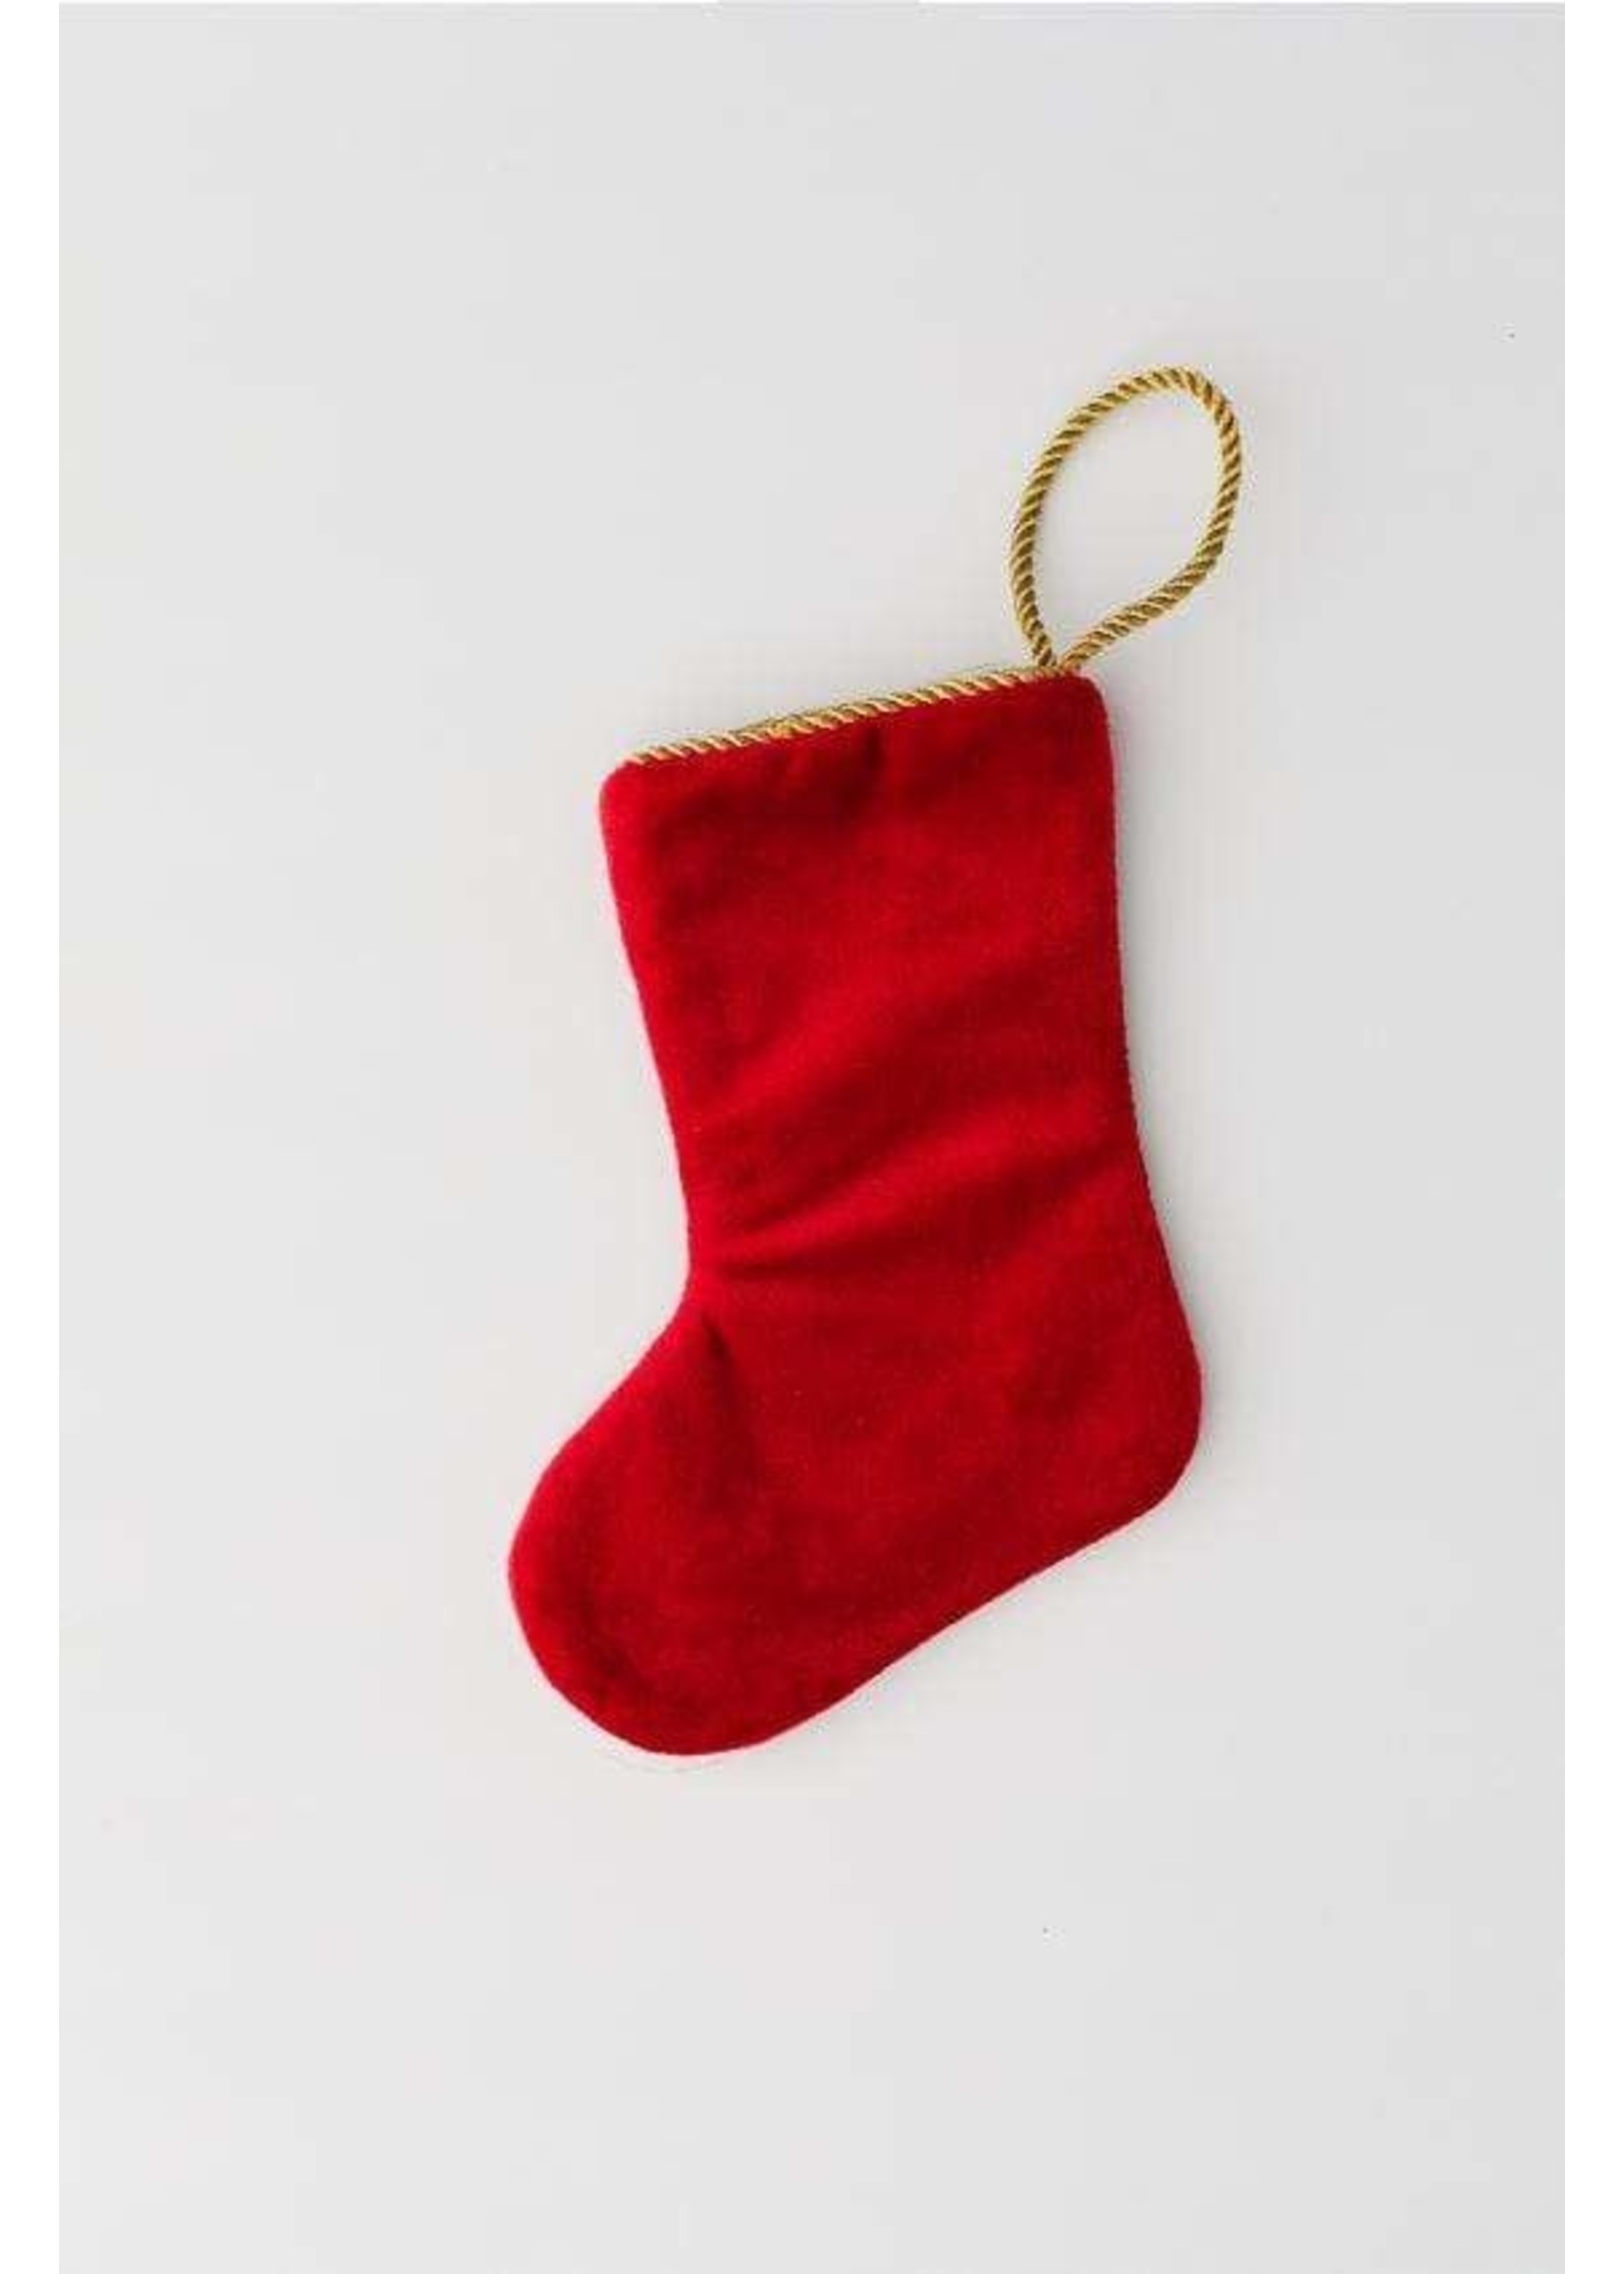 Bauble Stockings Bauble Stocking - Merry Christmas to All